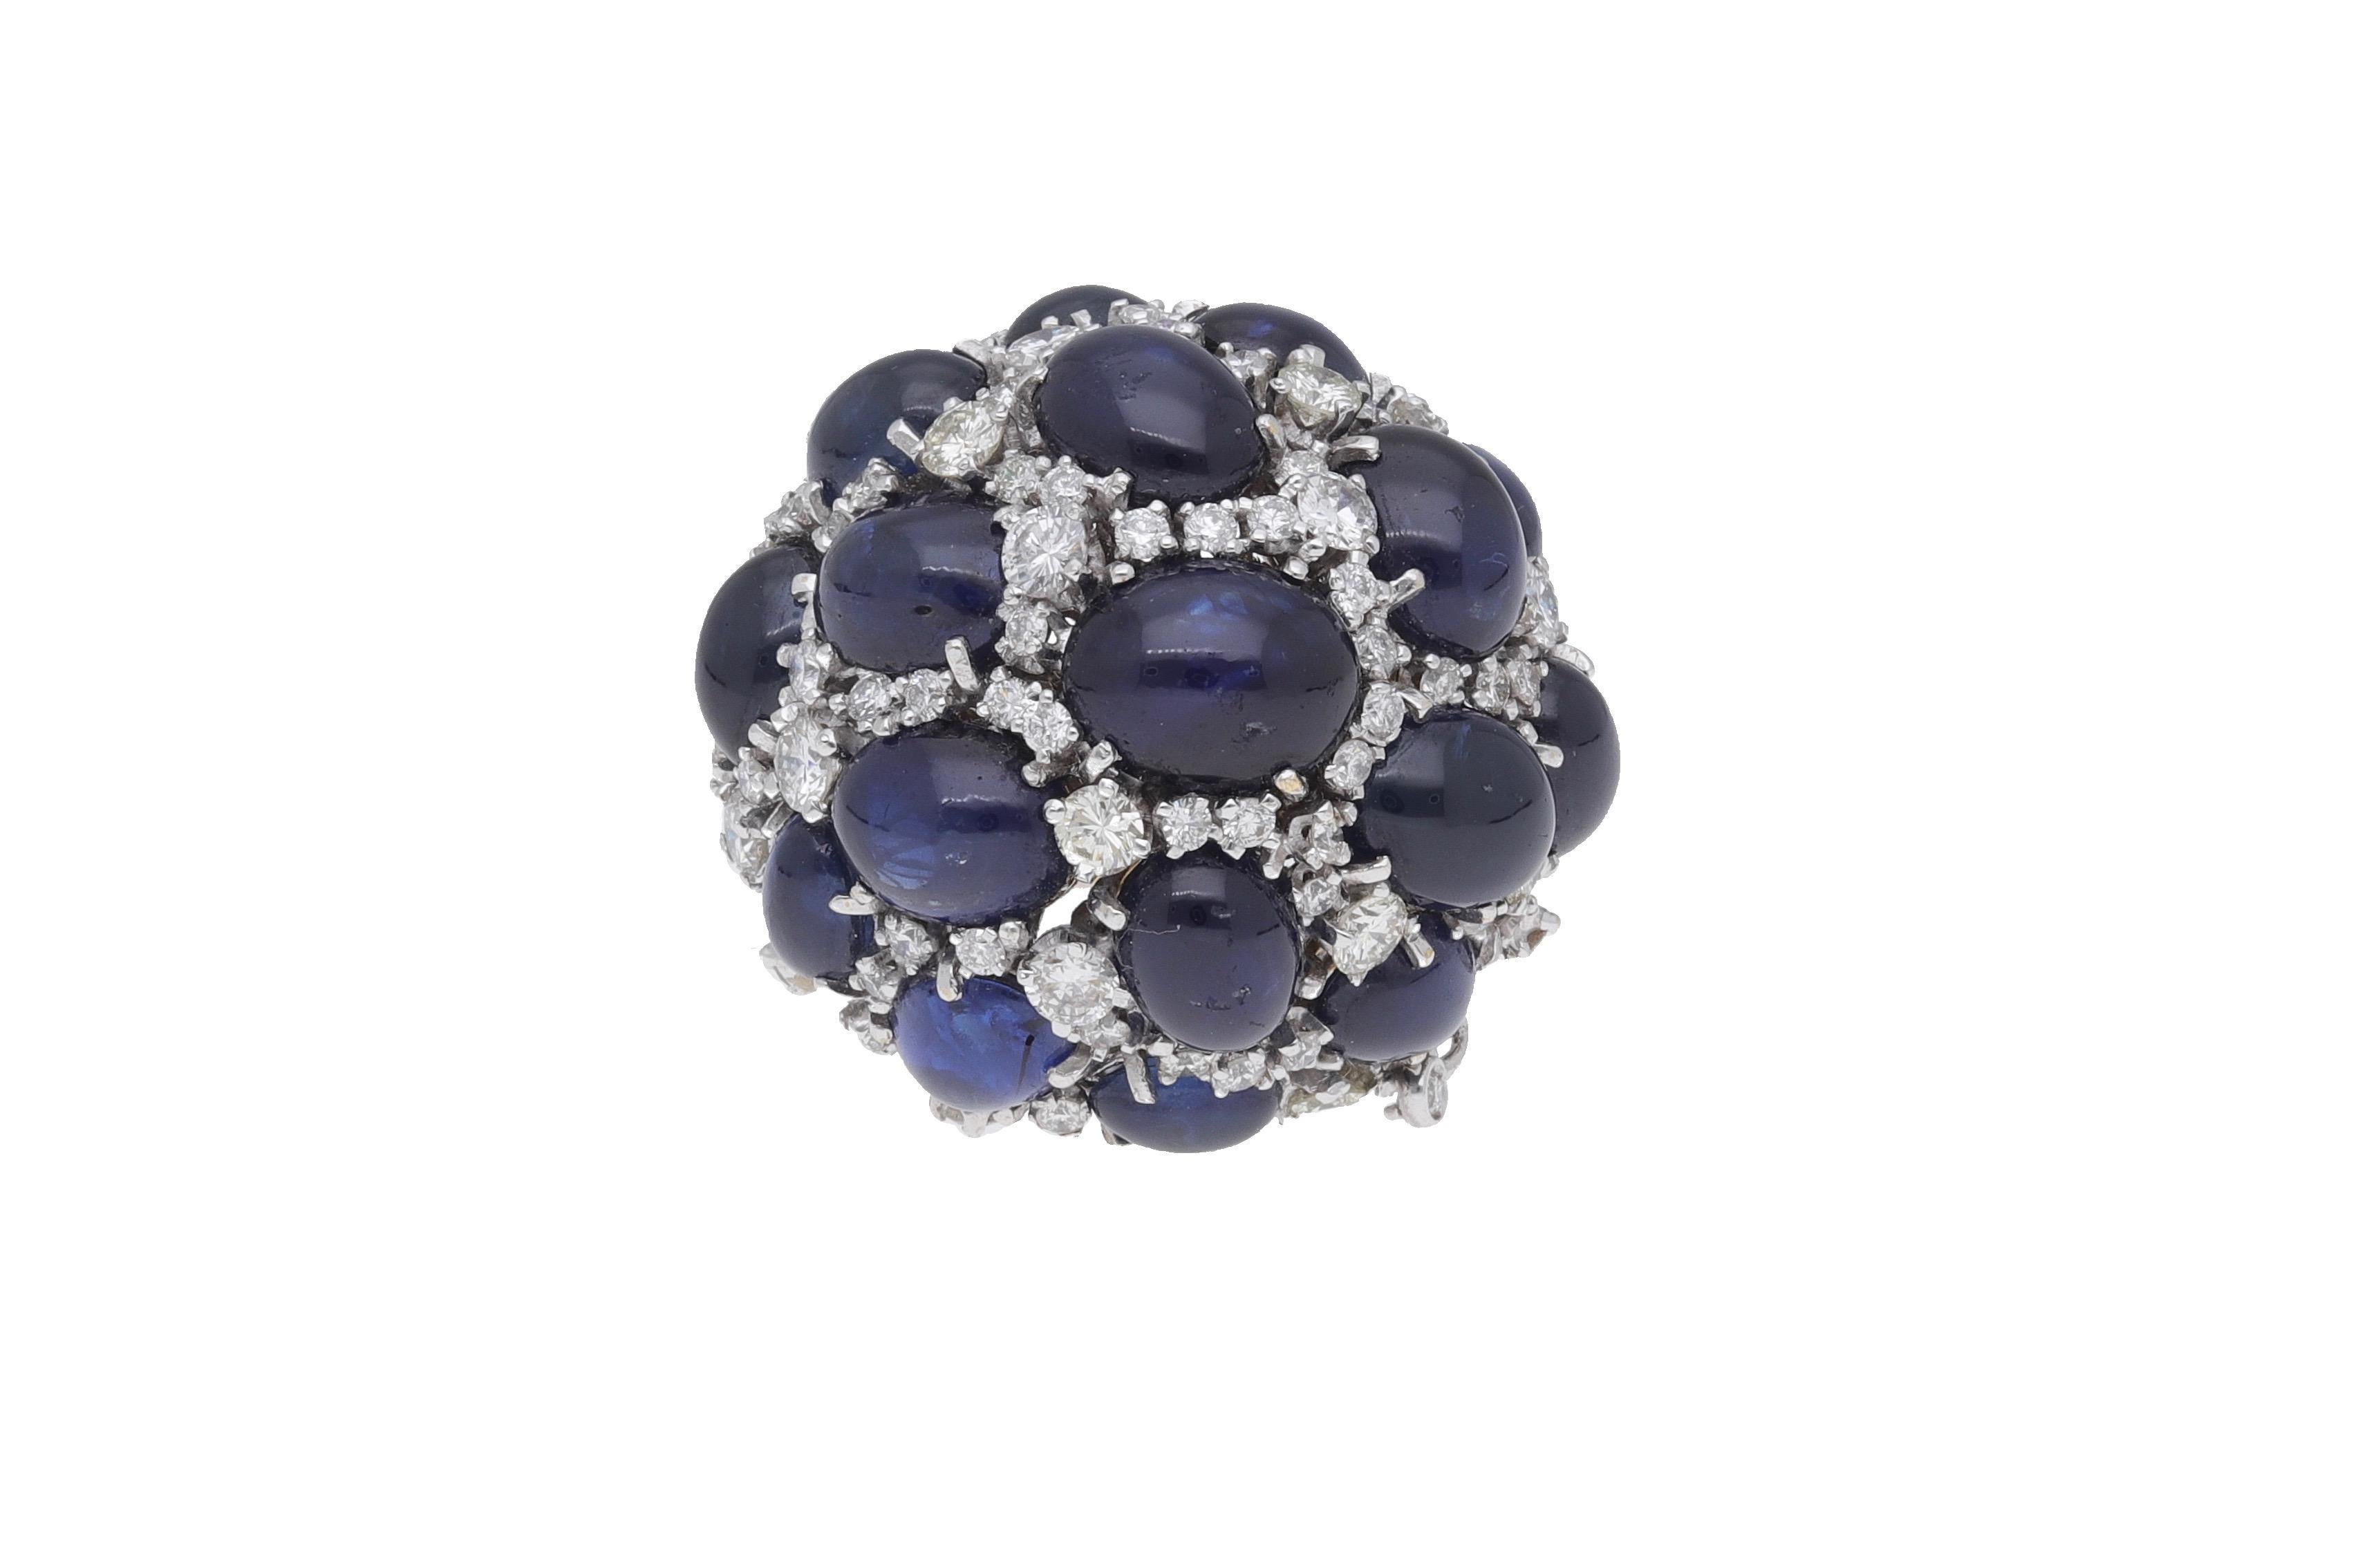 18 karat white gold cocktail ring with diamonds and cabochon blue sapphires.
Diamonds: 4.70 carat diamonds round-cut ( H-I color / VVS1 -VVS2 )
Sapphires: 32.10 carat of cabochon sapphires
Weight: gr. 36.50
Size: 6
Diameter: cm. 3.10
This stunning